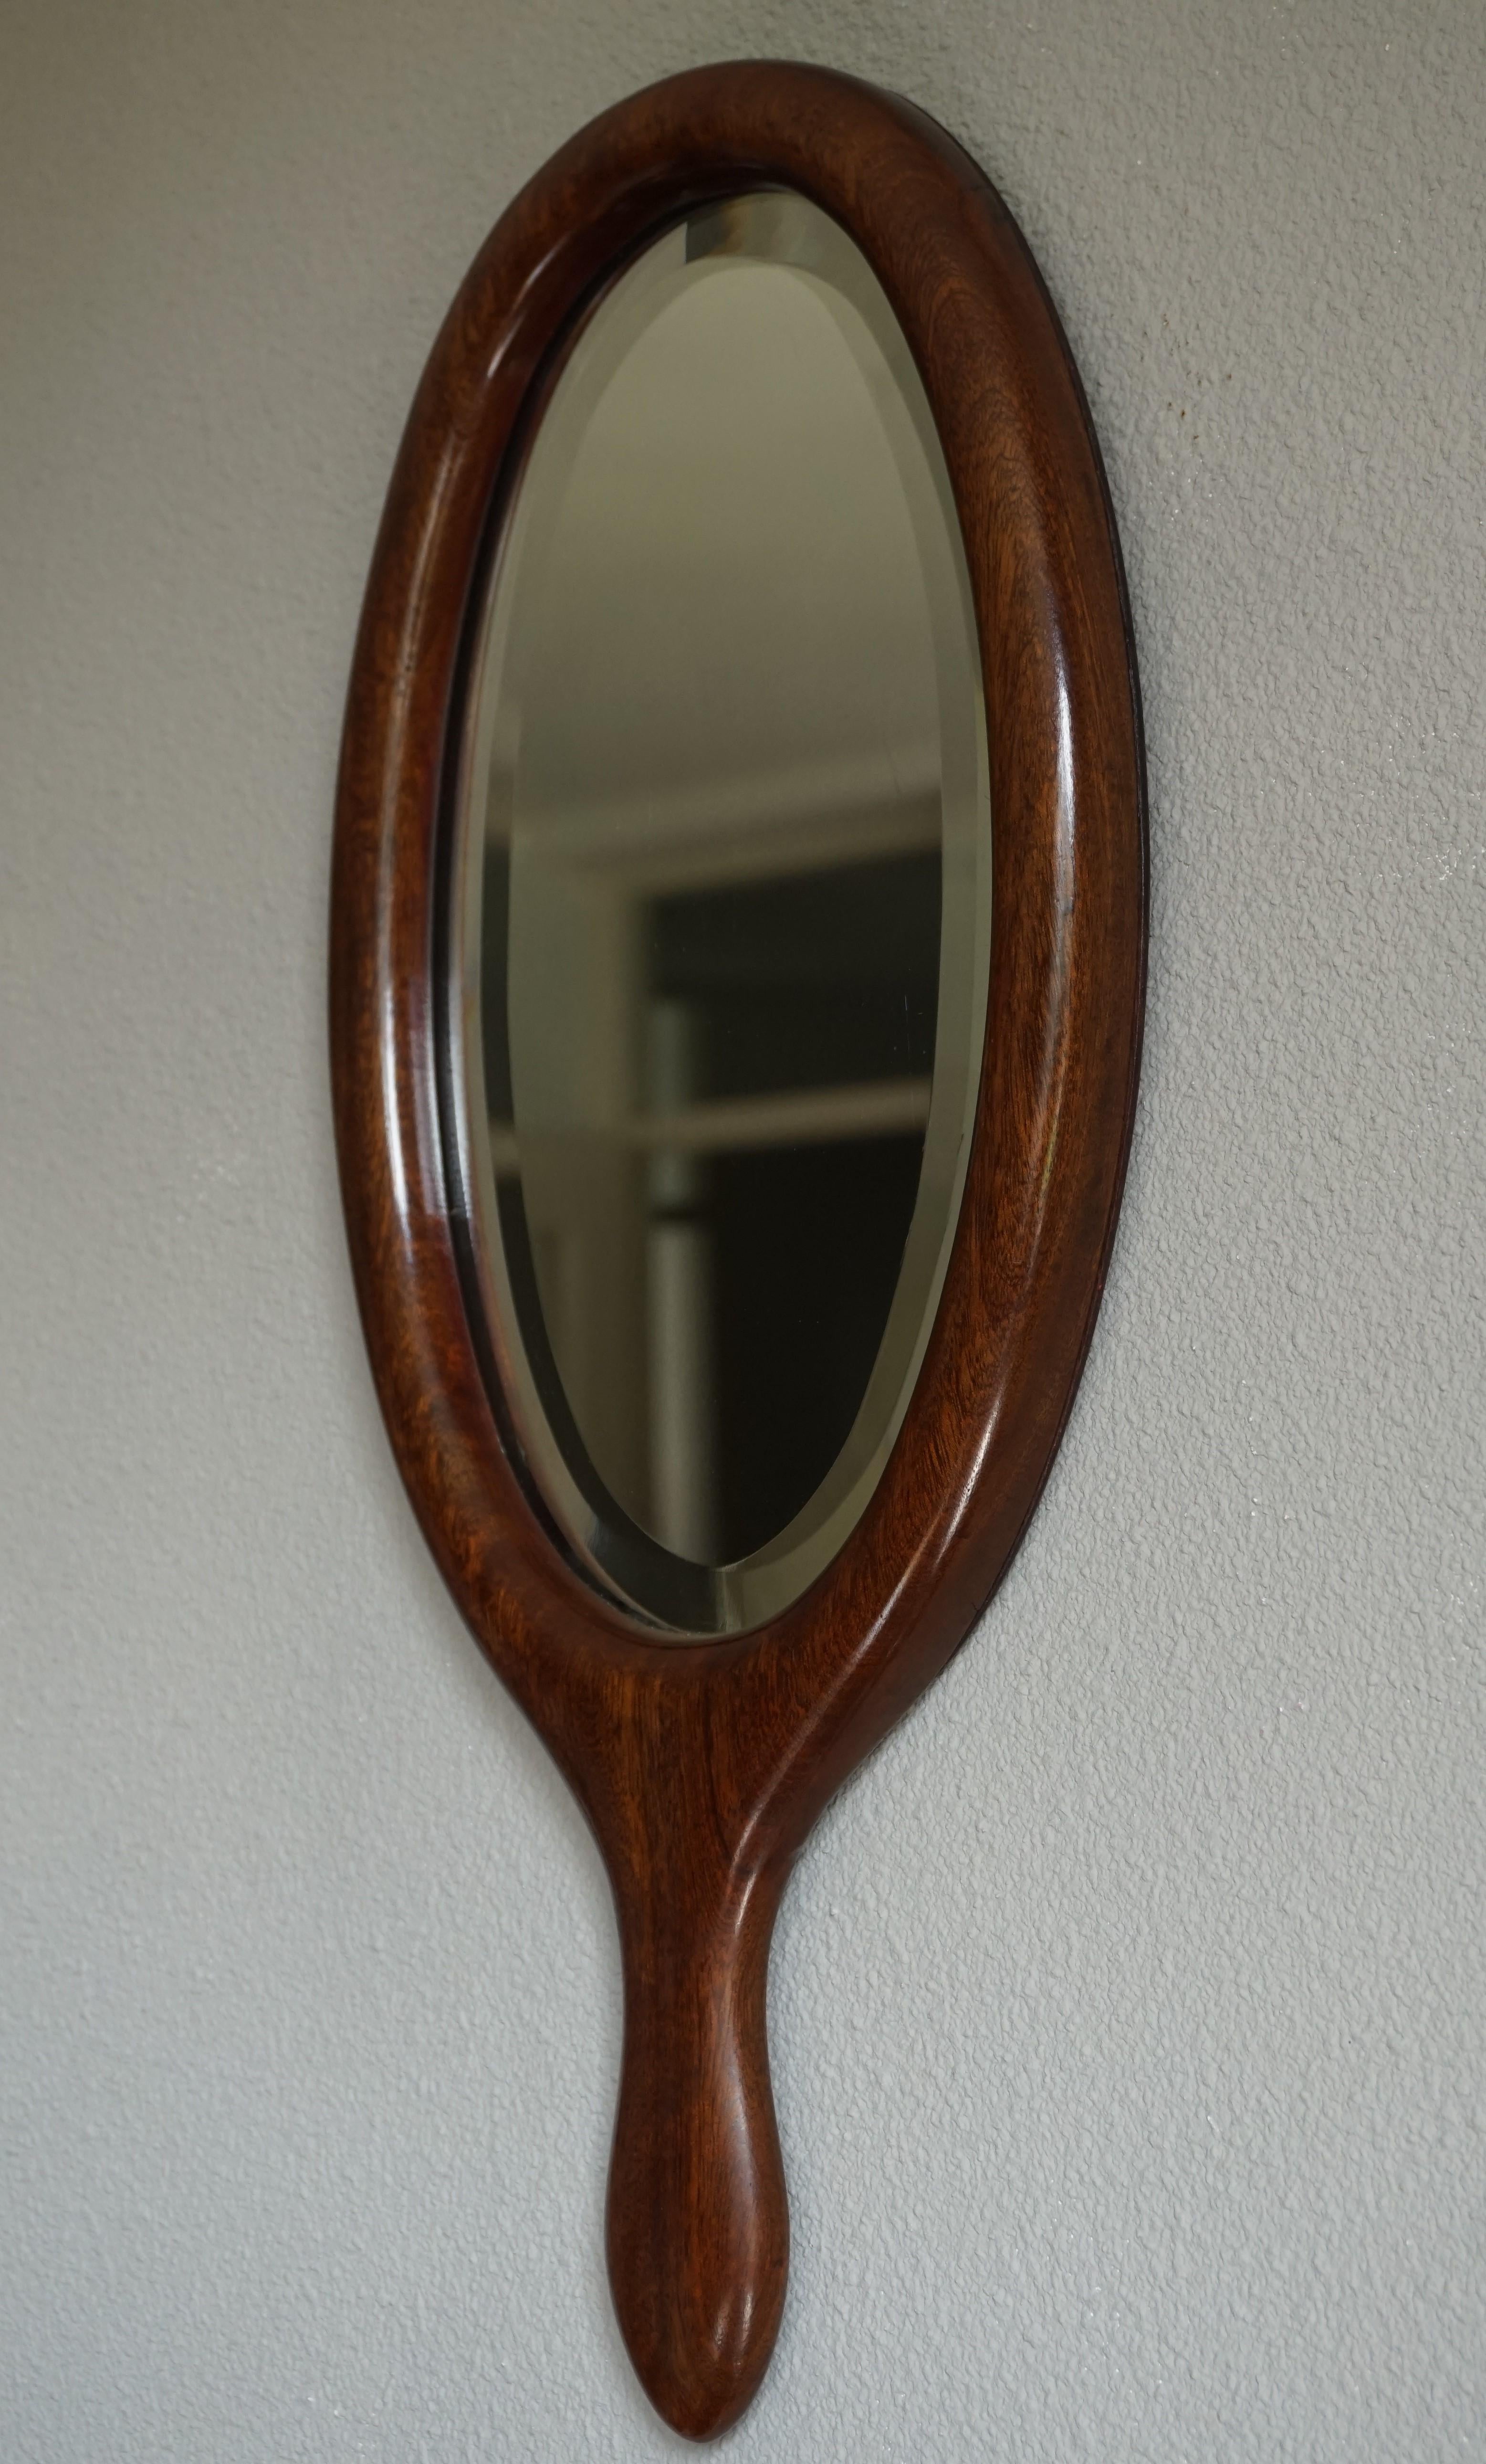 Antique 19th Century Handcrafted Nutwood & Beveled Glass Hand or Vanity Mirror For Sale 2